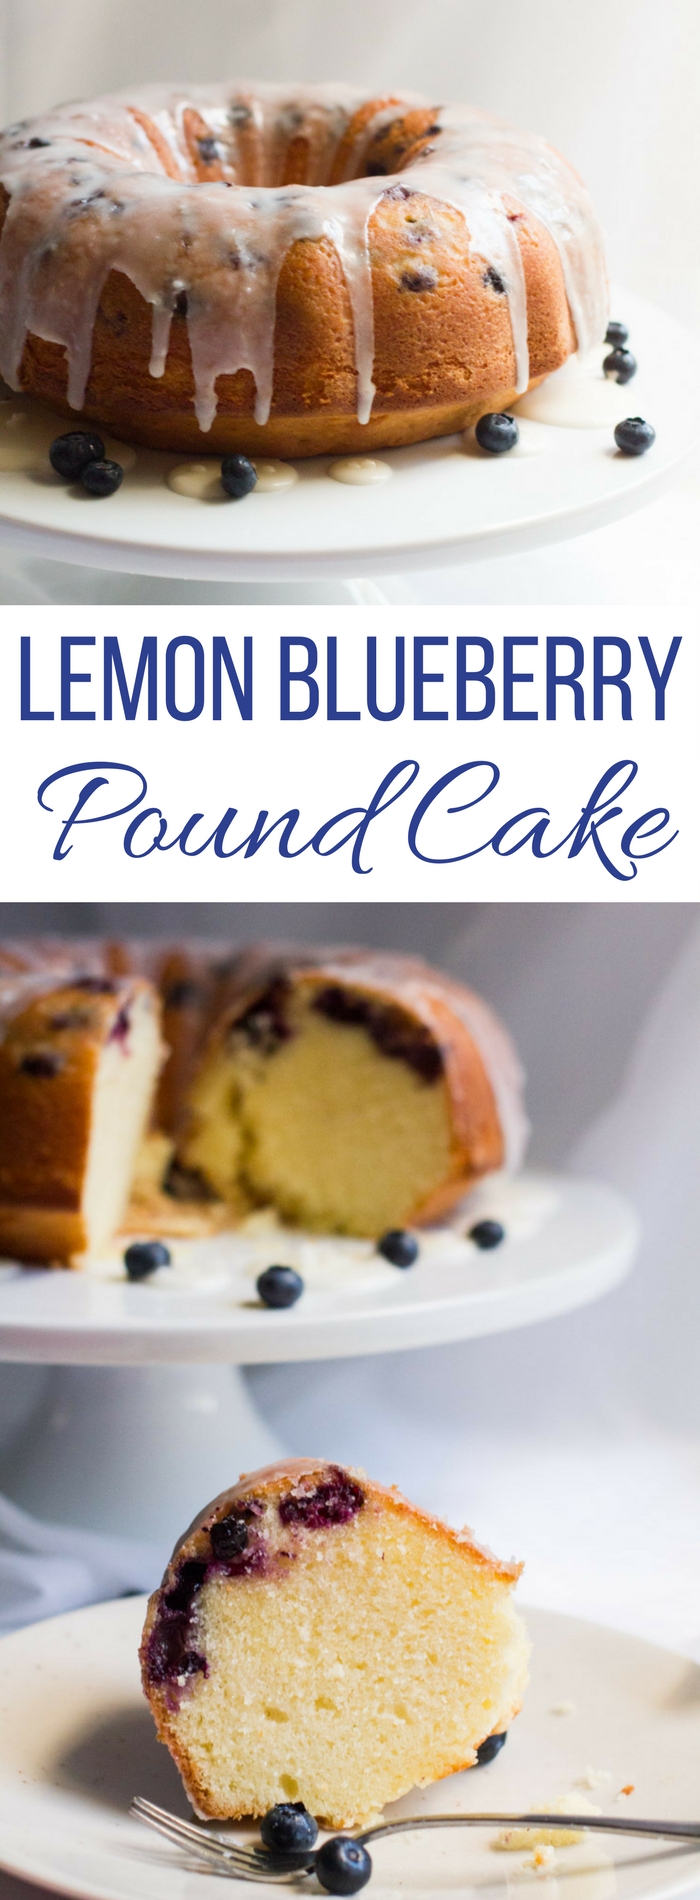 This lemon blueberry pound cake is a dense, perfect from scratch recipe - tasty all year round!